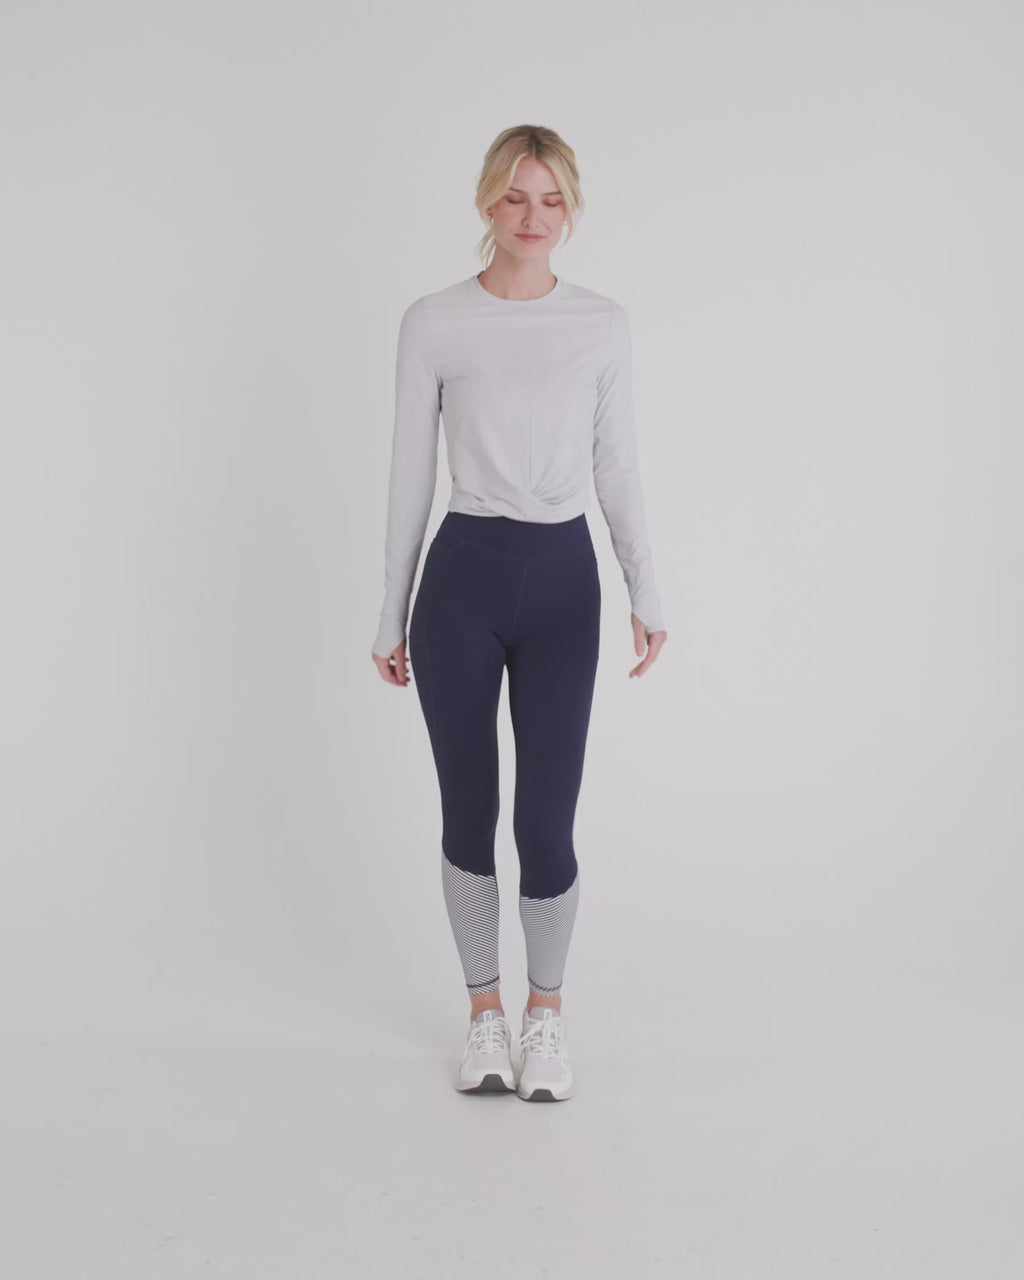 The video of the Southern Tide Margot brrr°-illiant Twist Knot Top by Southern Tide - Platinum Grey